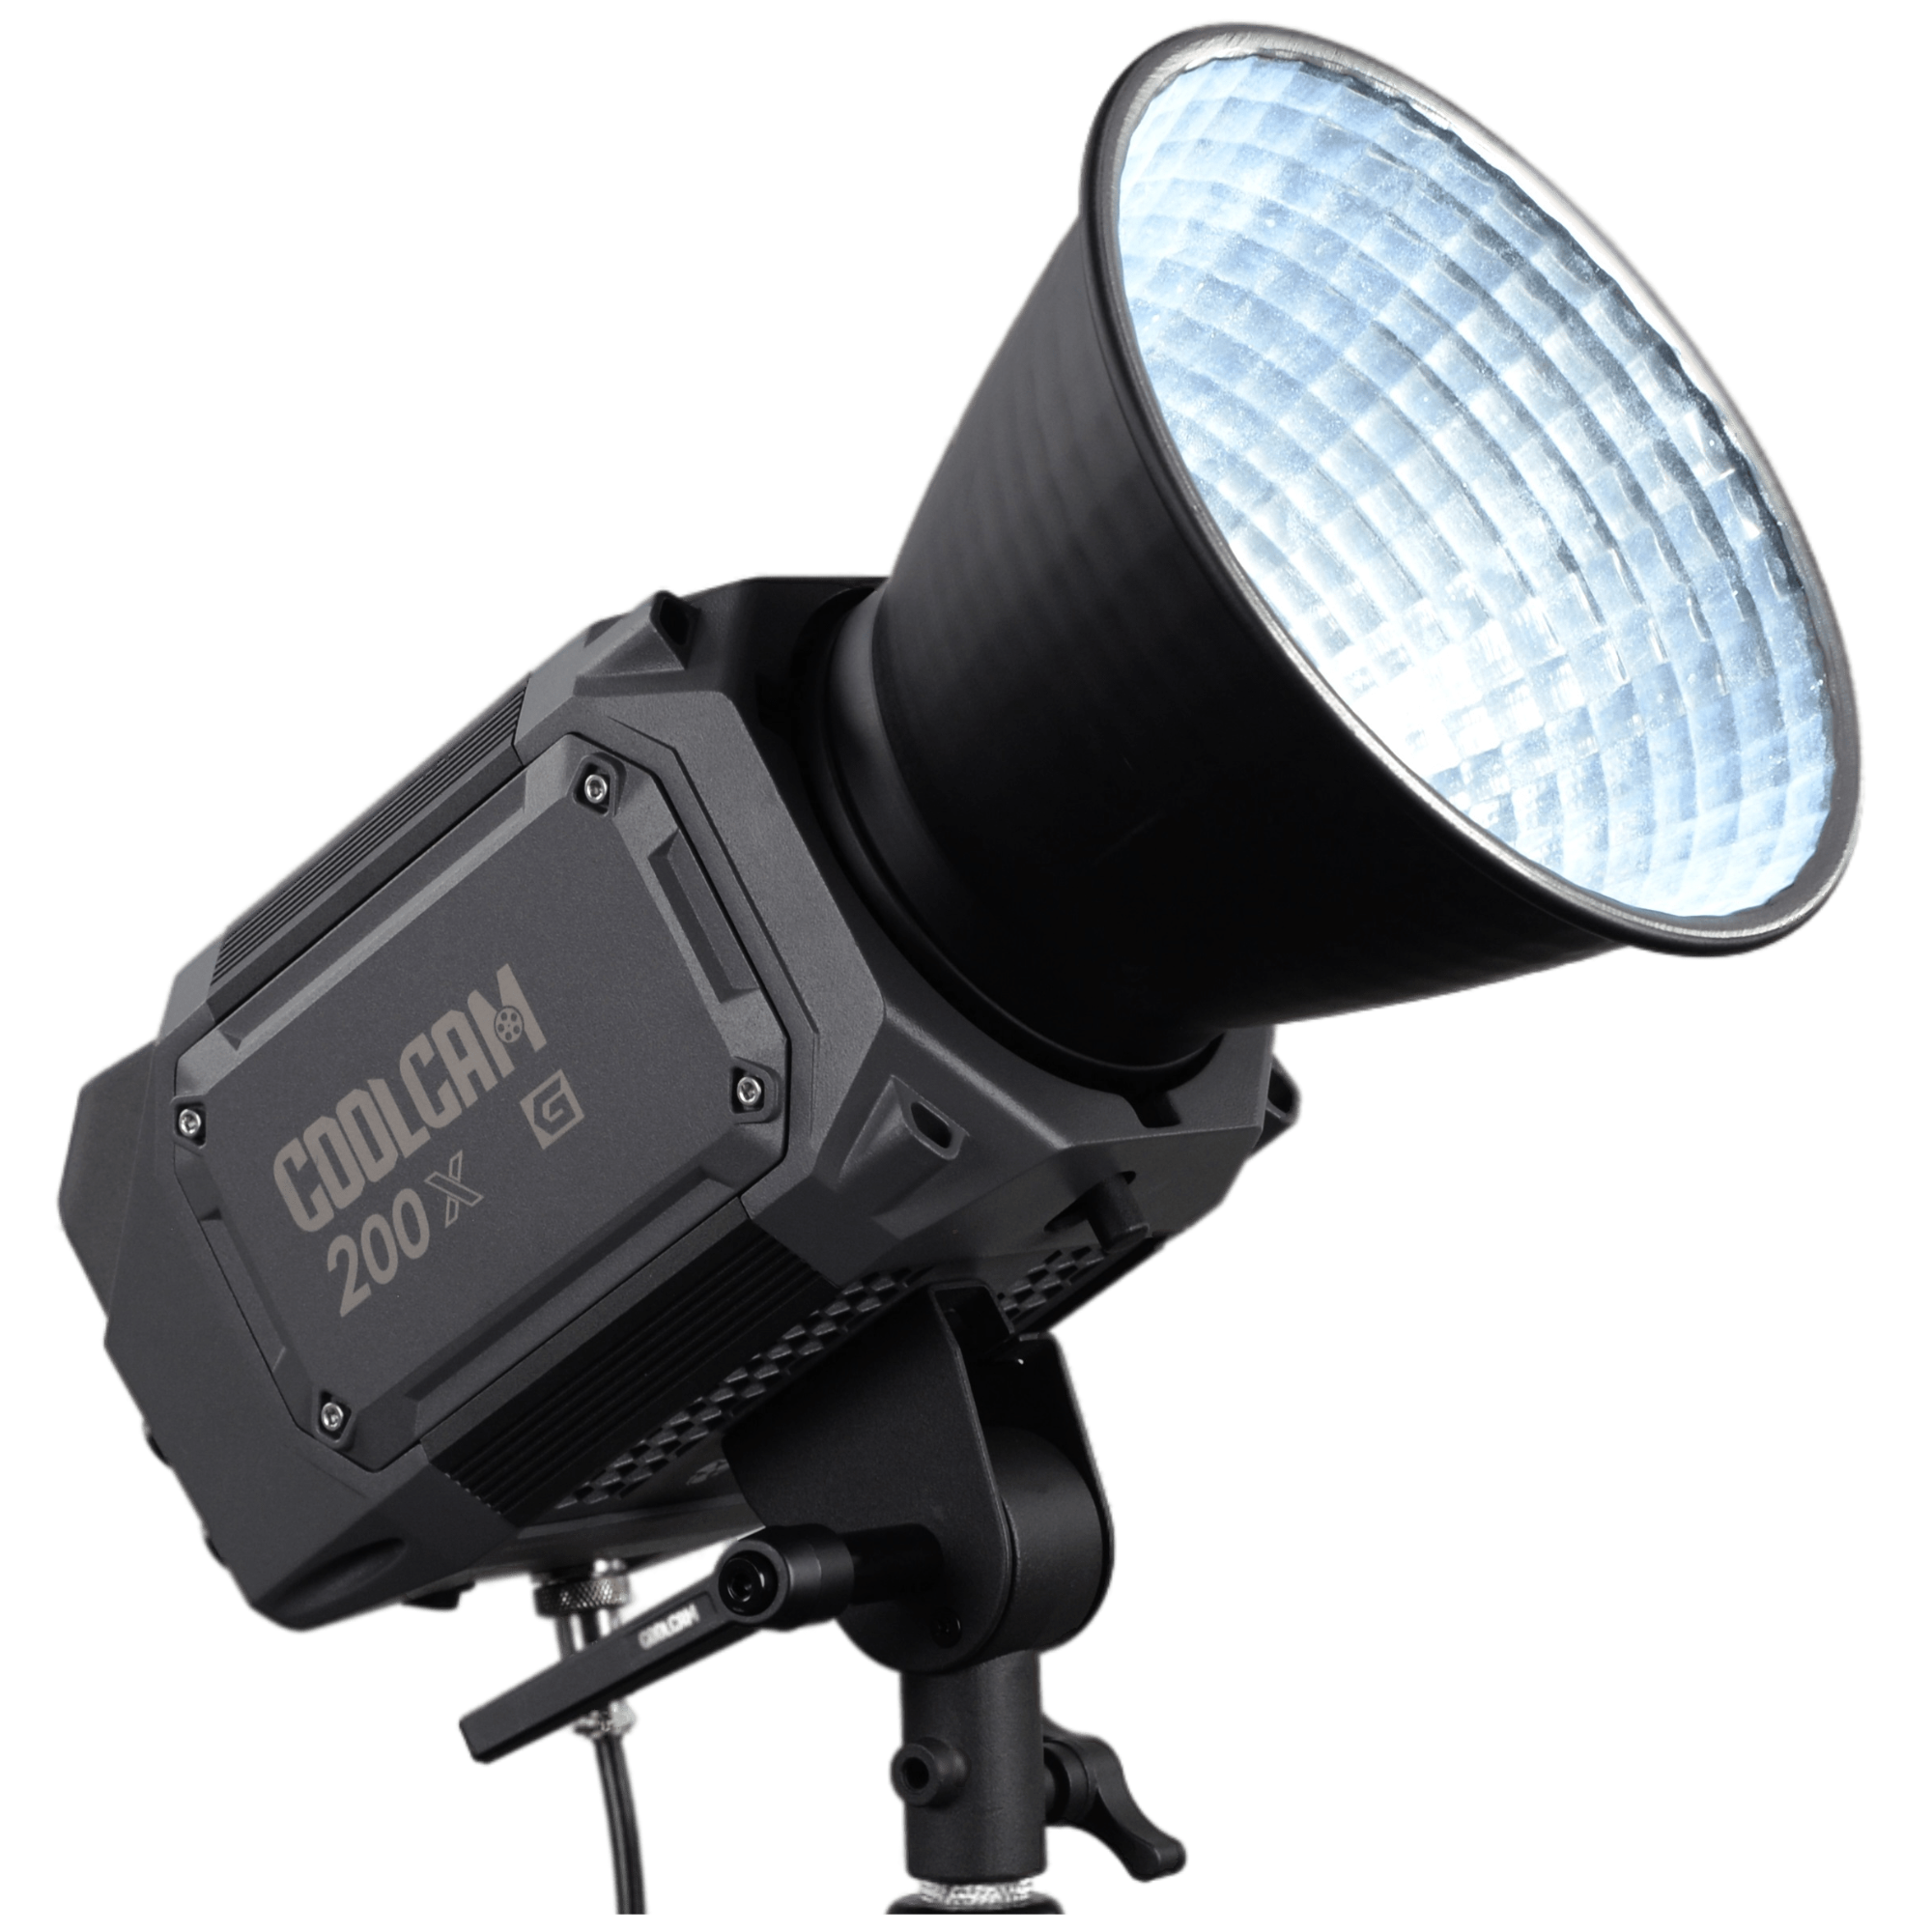 LS Coolcam 200X High Power LED Continuous Video Light